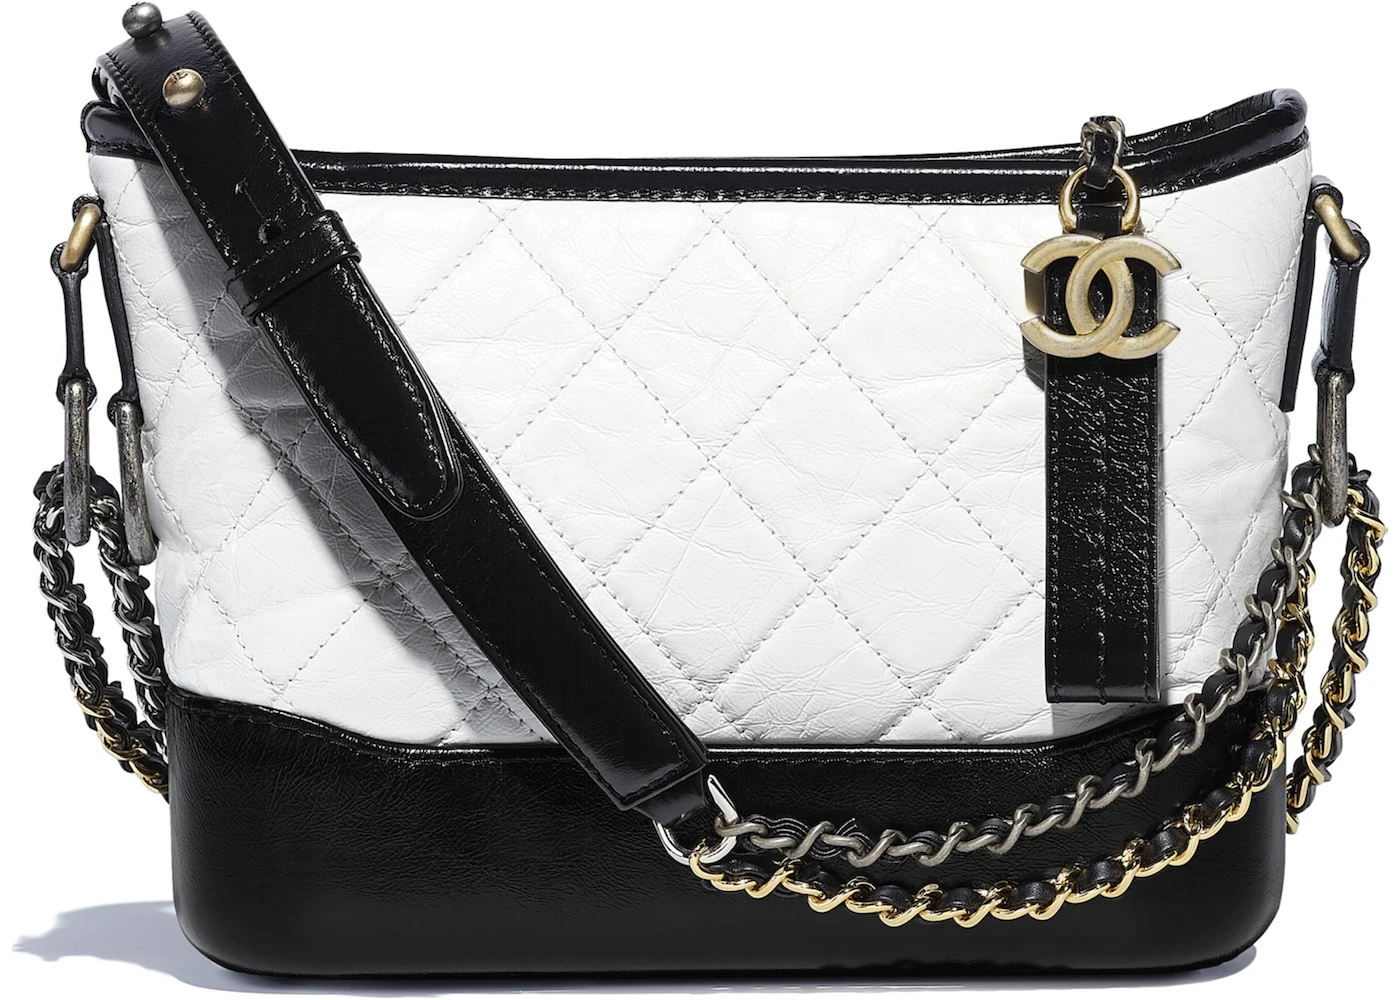 Chanel Gabrielle Hobo Bag Diamond Gabrielle Quilted Aged/Smooth Small Black  - US